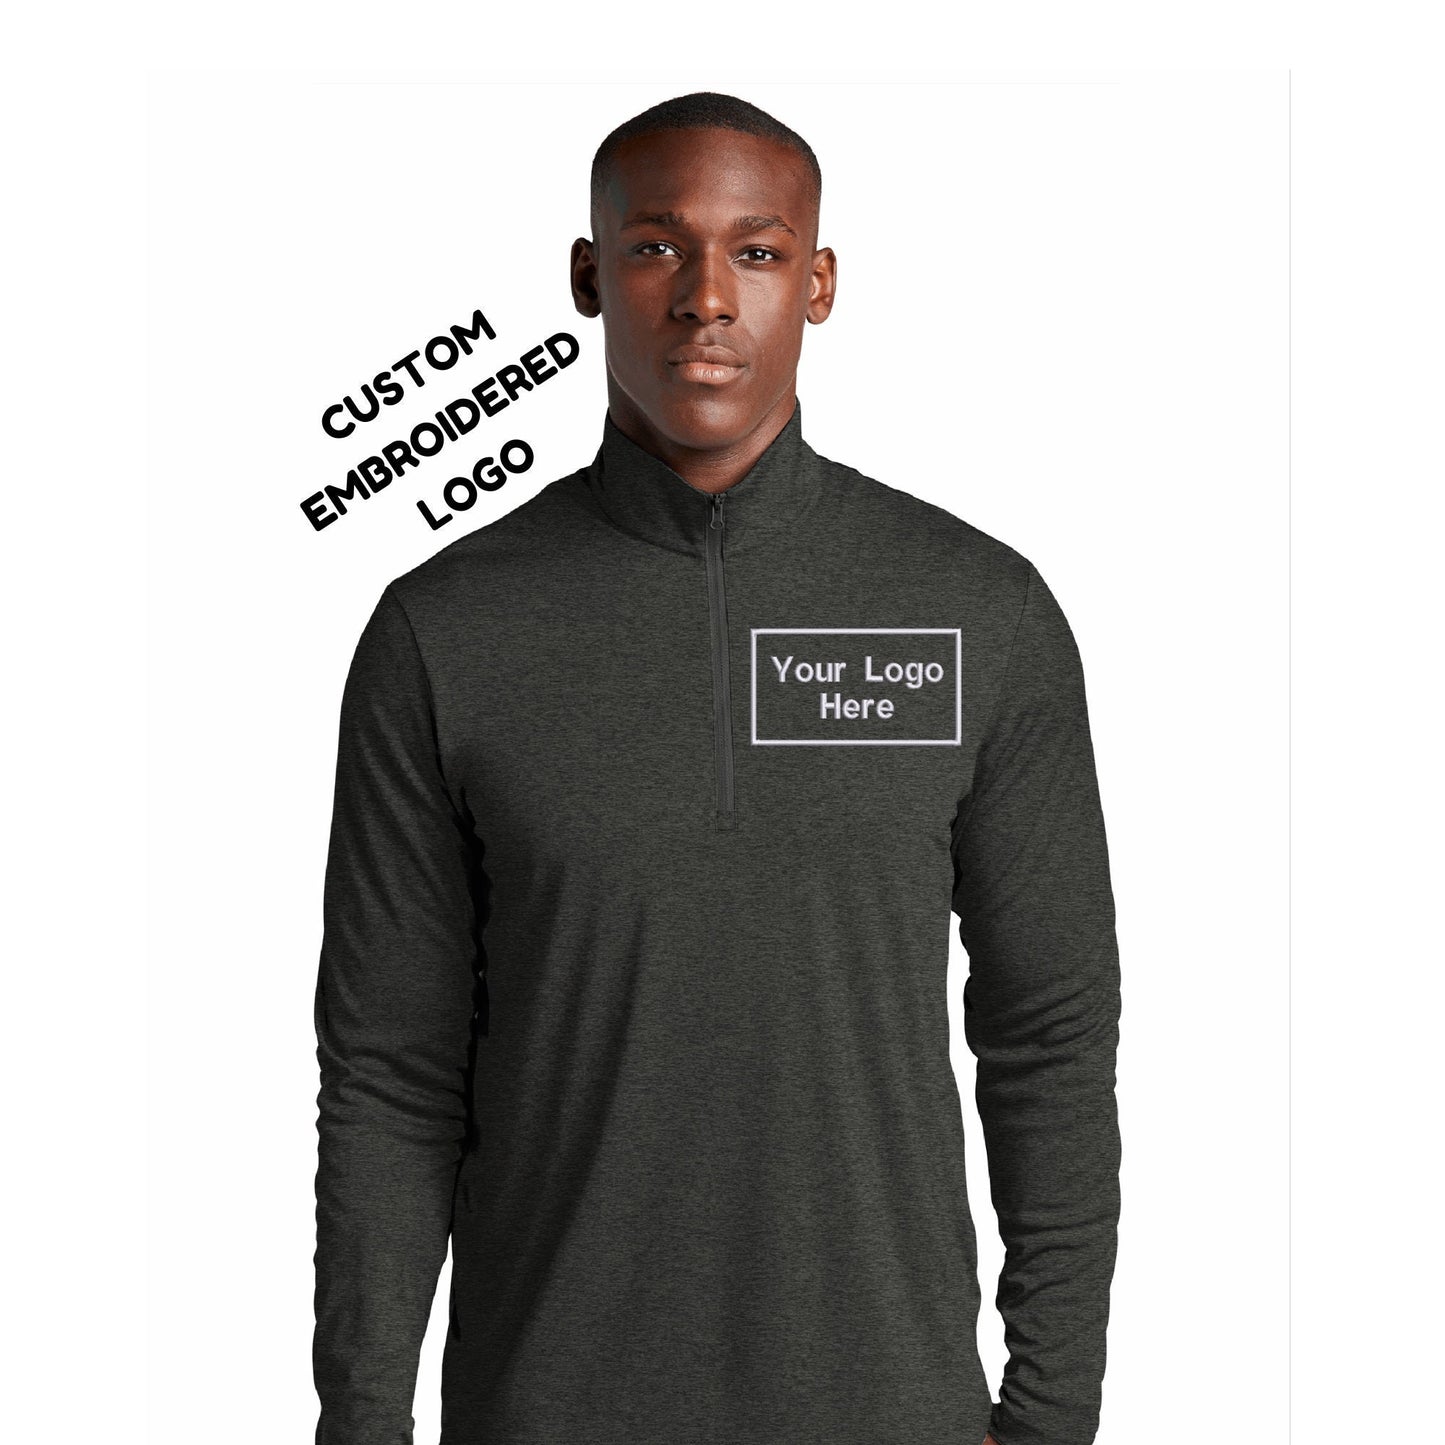 Custom Logo Embroidered Shirt Text Personalized Quarter Zip Athletic Top No Minimum